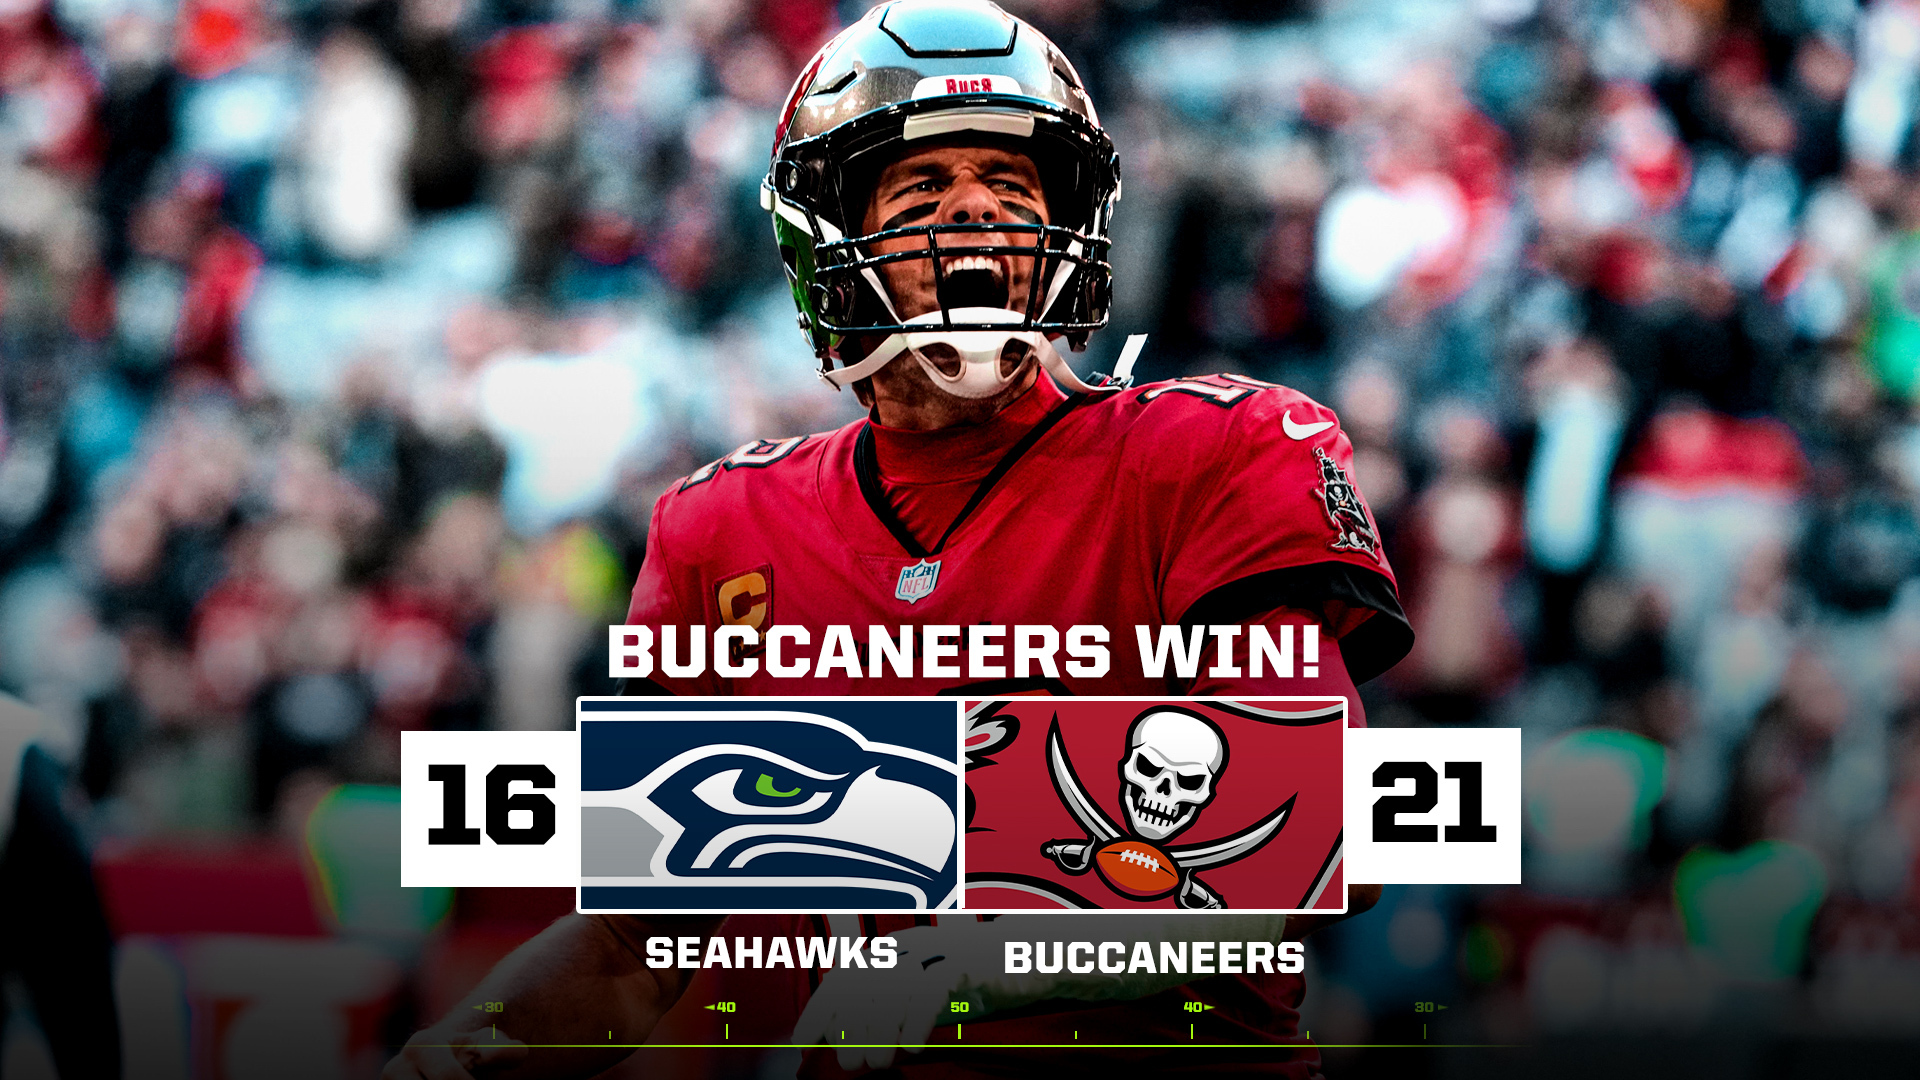 Brady, Buccaneers Survive Late Seahawks’ Comeback Attempt in Germany